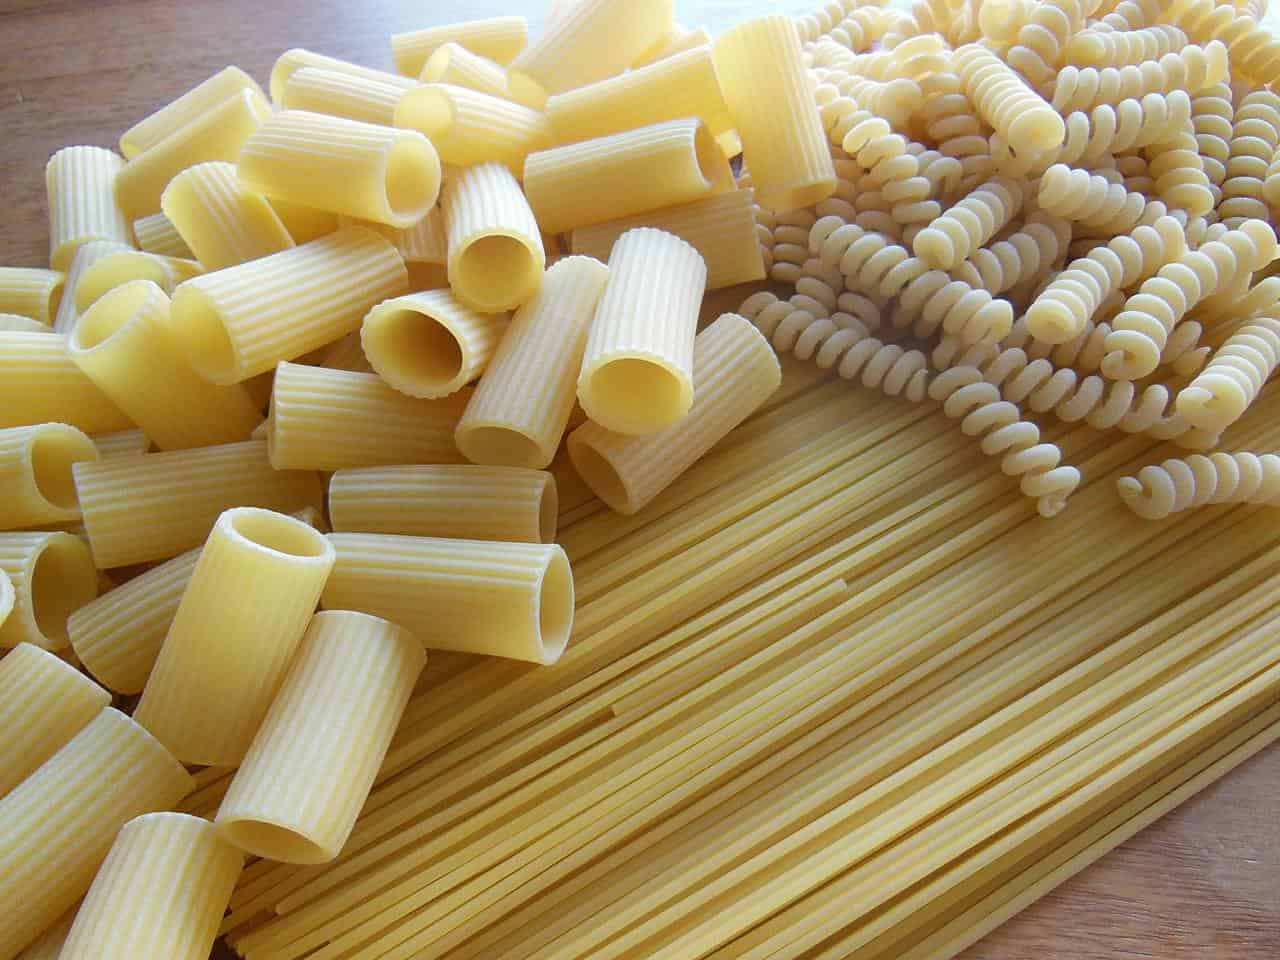 Can You Eat Raw Pasta? Is It Bad for Health?